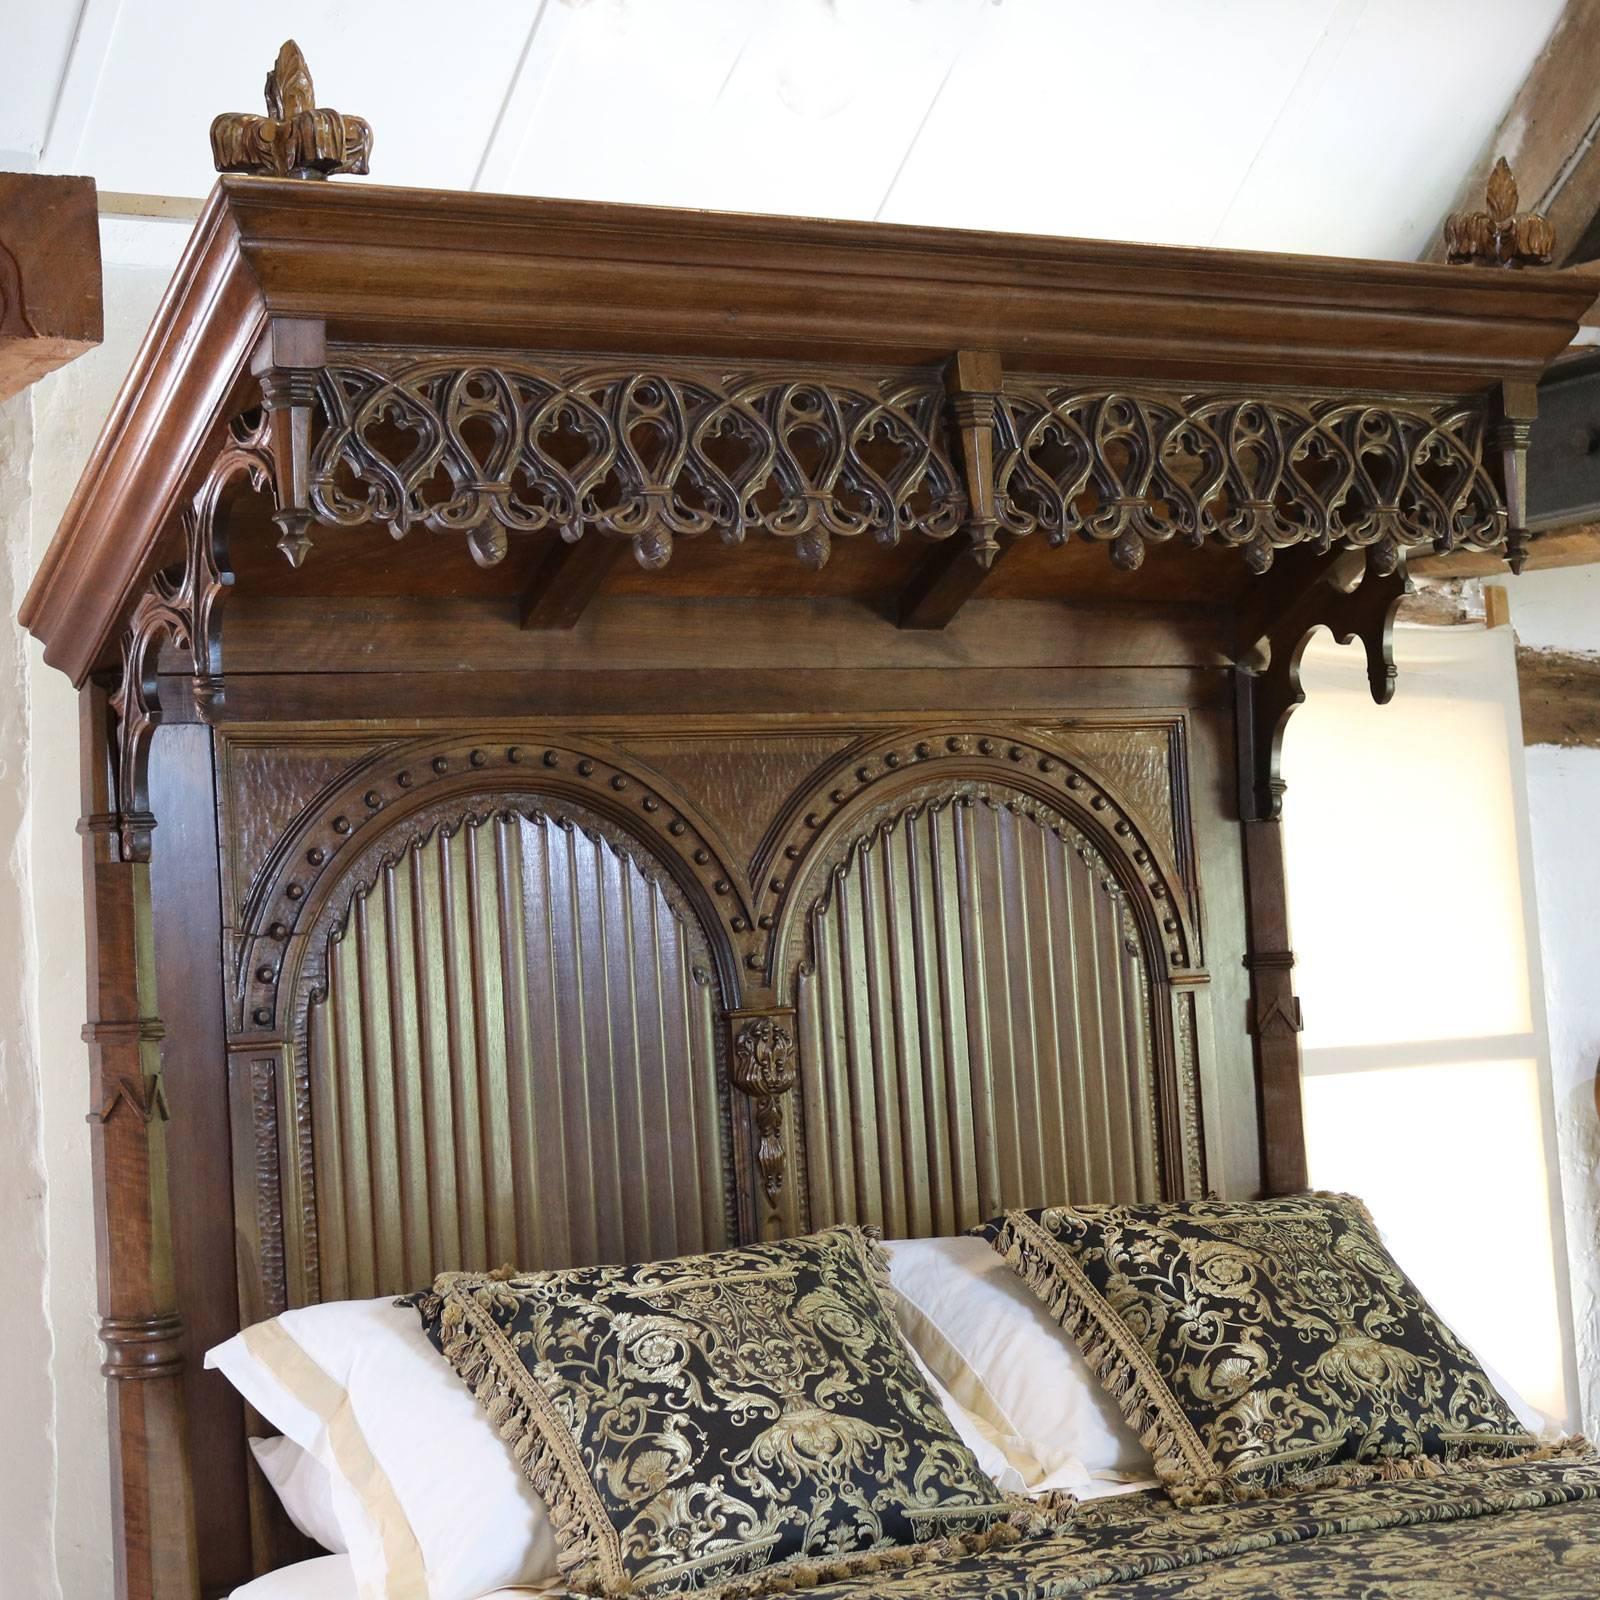 This magnificent Gothic half tester bed has linenfold carved decoration on the back panels, the foot board and side runners. The intricate pierced carved canopy is suspended over the back board and surmounted with carved finials.

The bed was